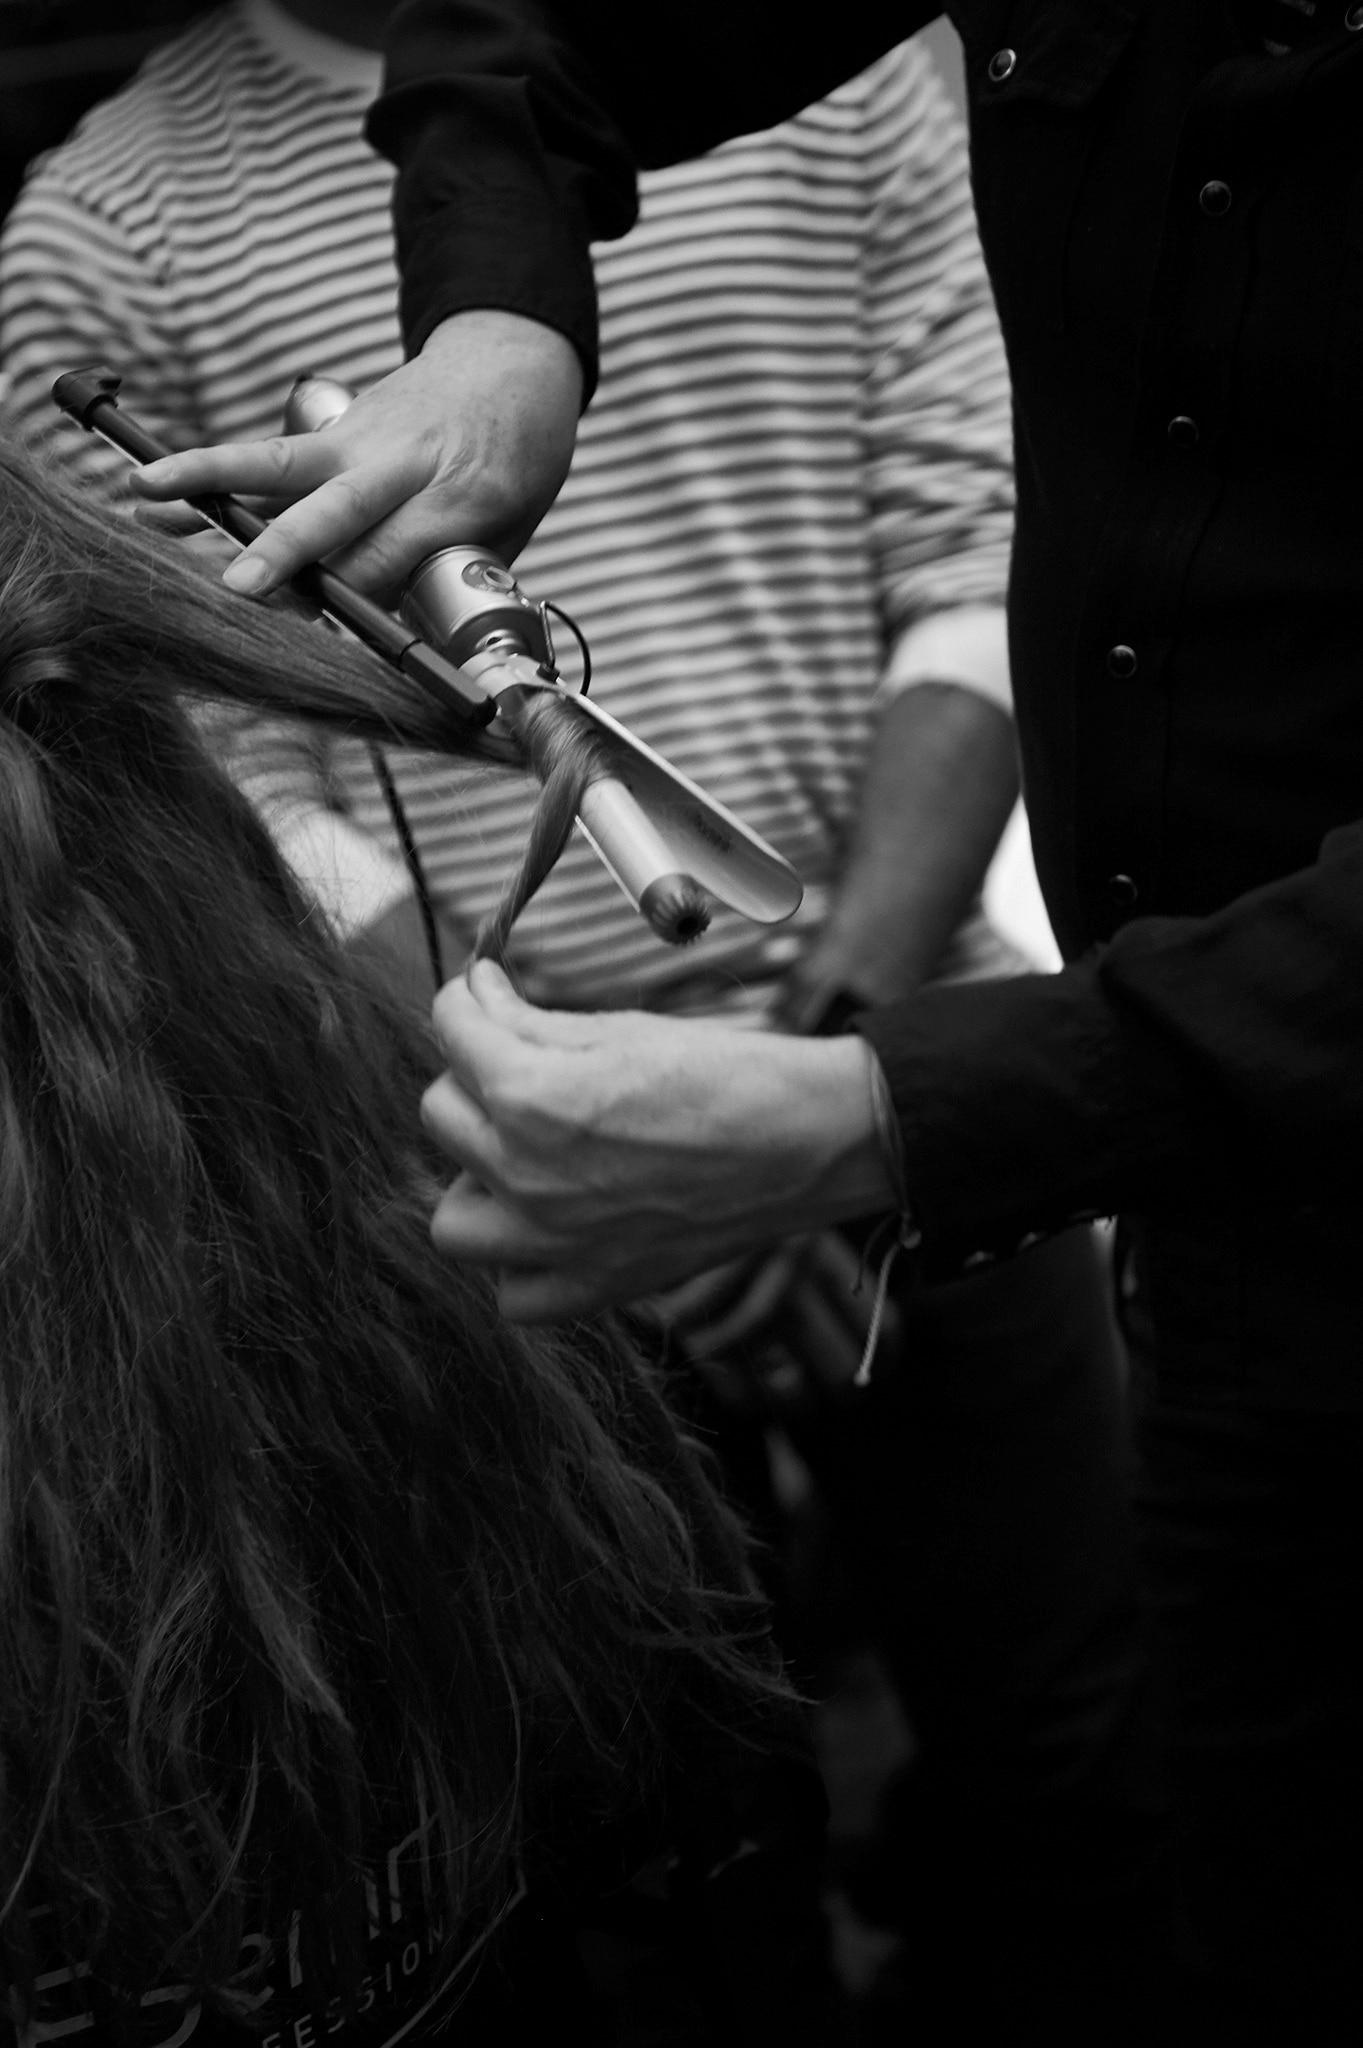 A stylist using curling tongs on a model's long, dark curly hair